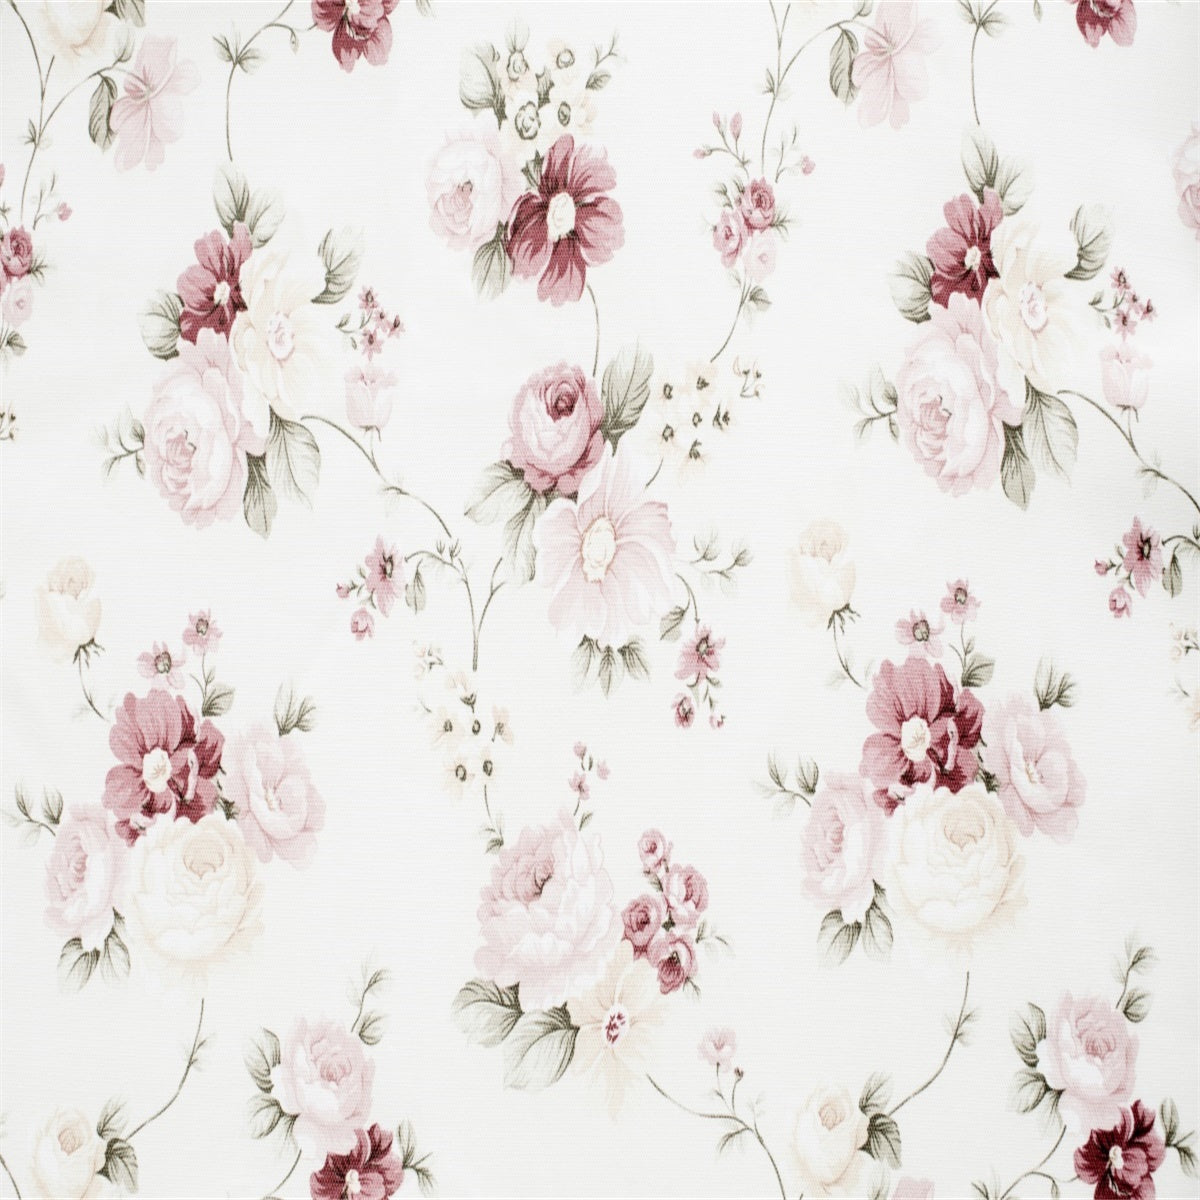 Abstract Floral Baby Show Fabric Backdrops for Photography